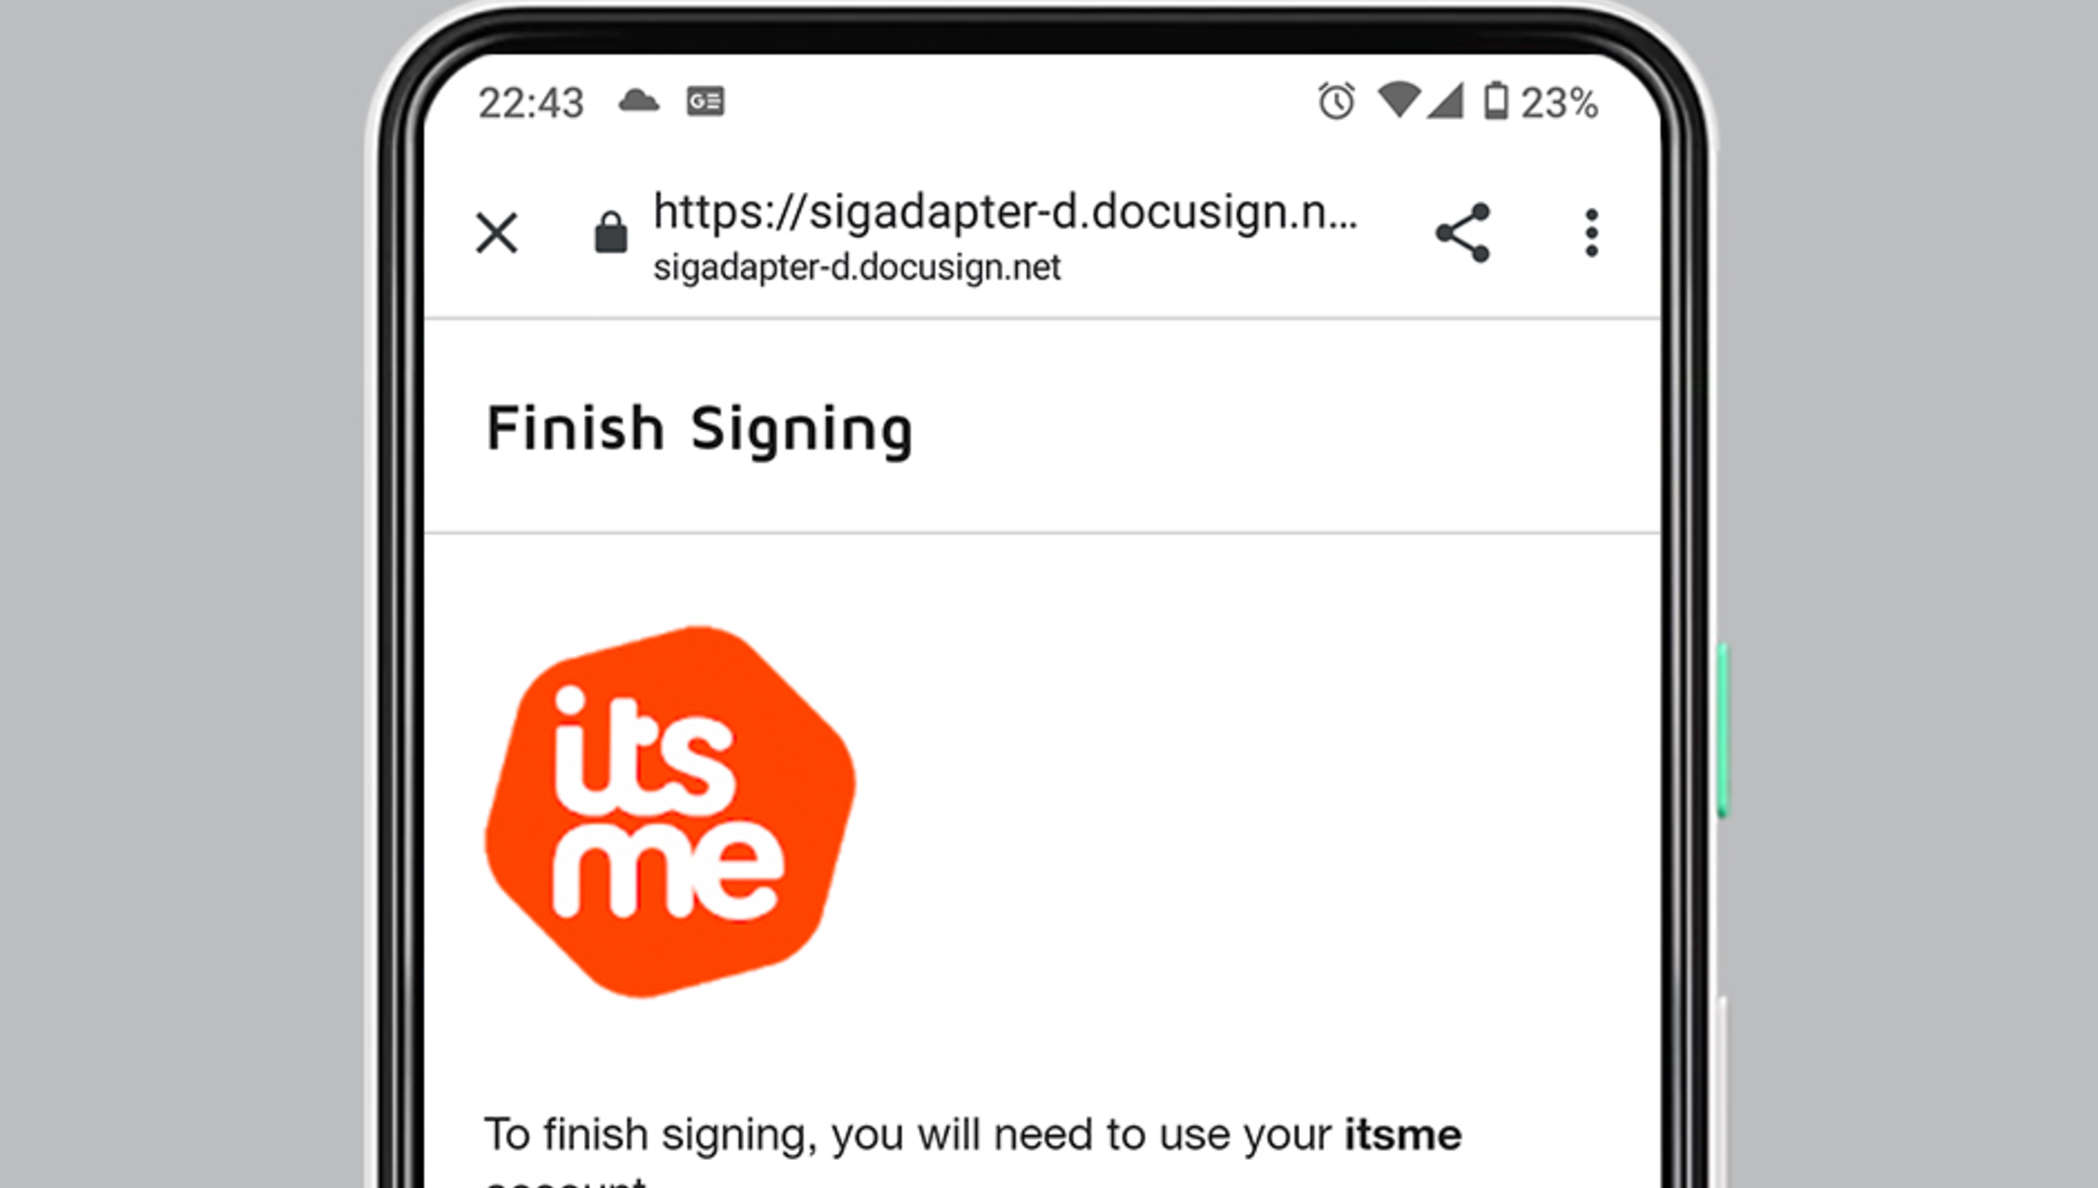 itsme® Sign experience